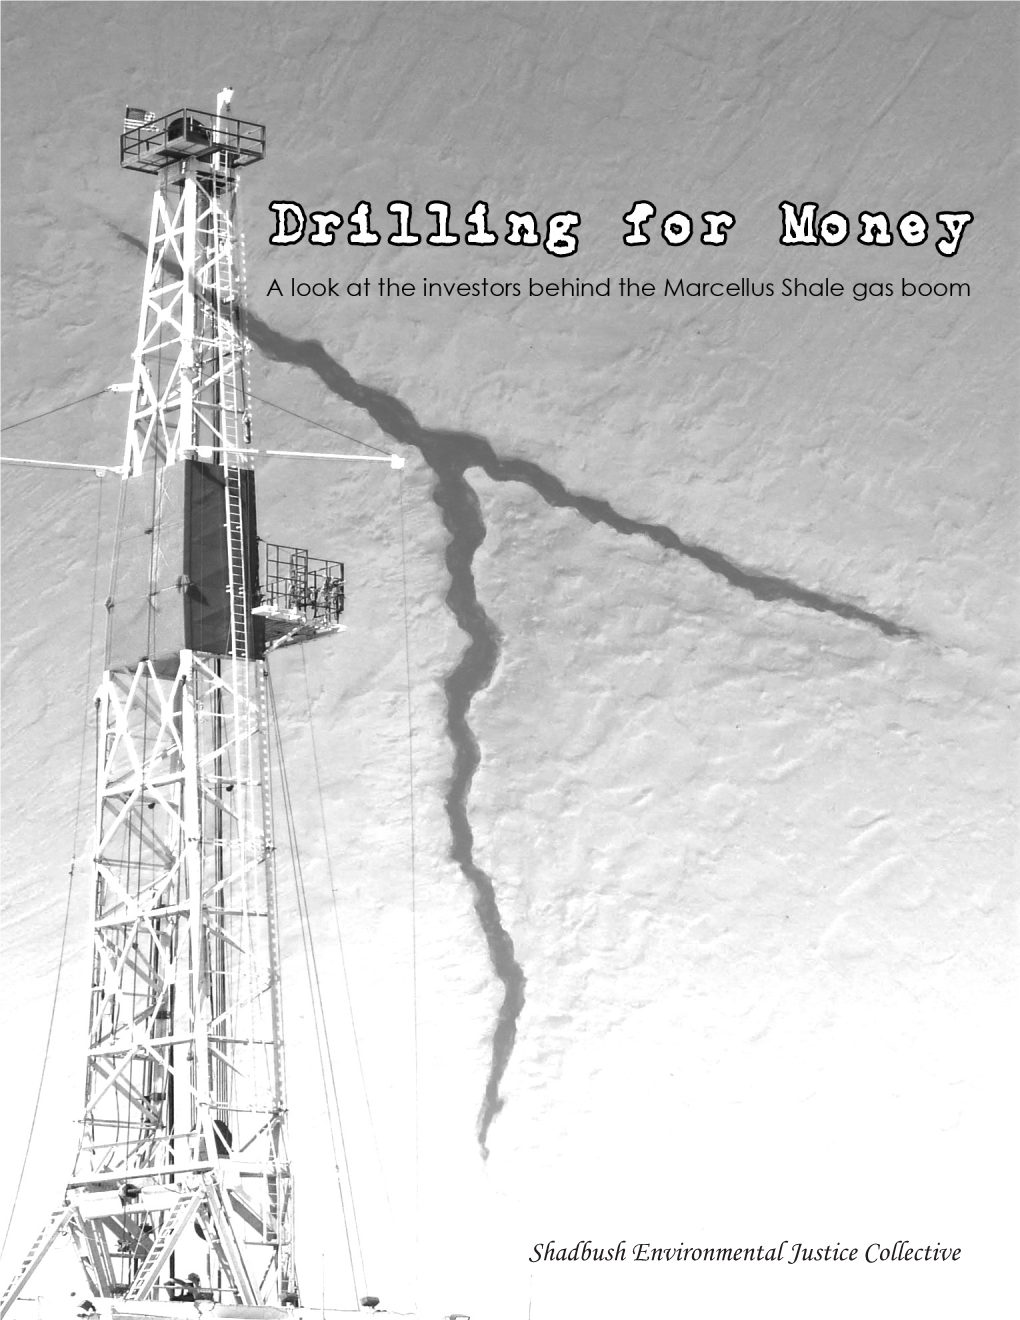 Drilling for Money—Takes a Look at the Shareholders in the Gas Drilling Industry